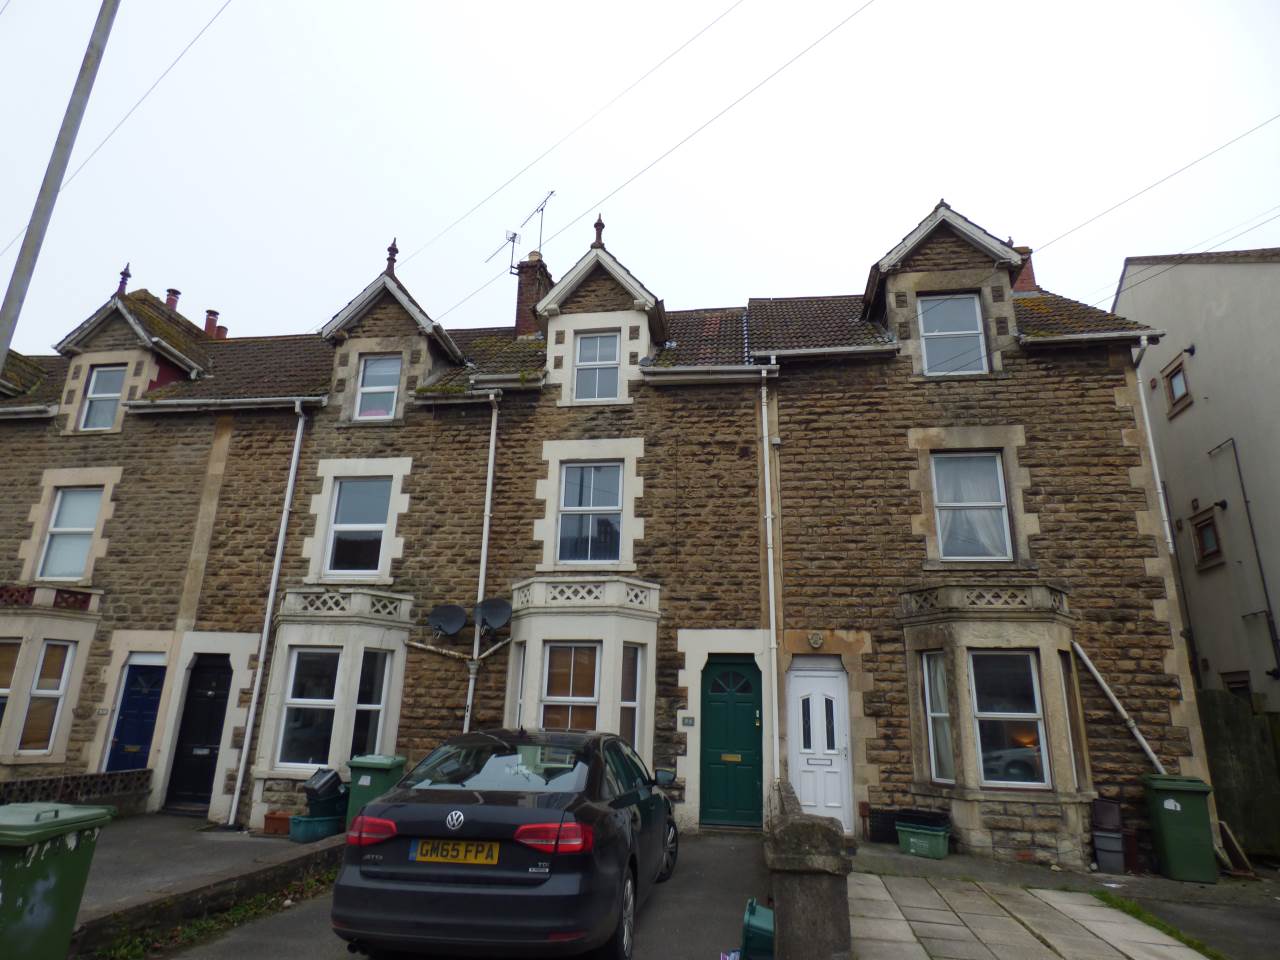 4 bed House (unspecified) for rent in Frome. From Lettings-R-Us Frome